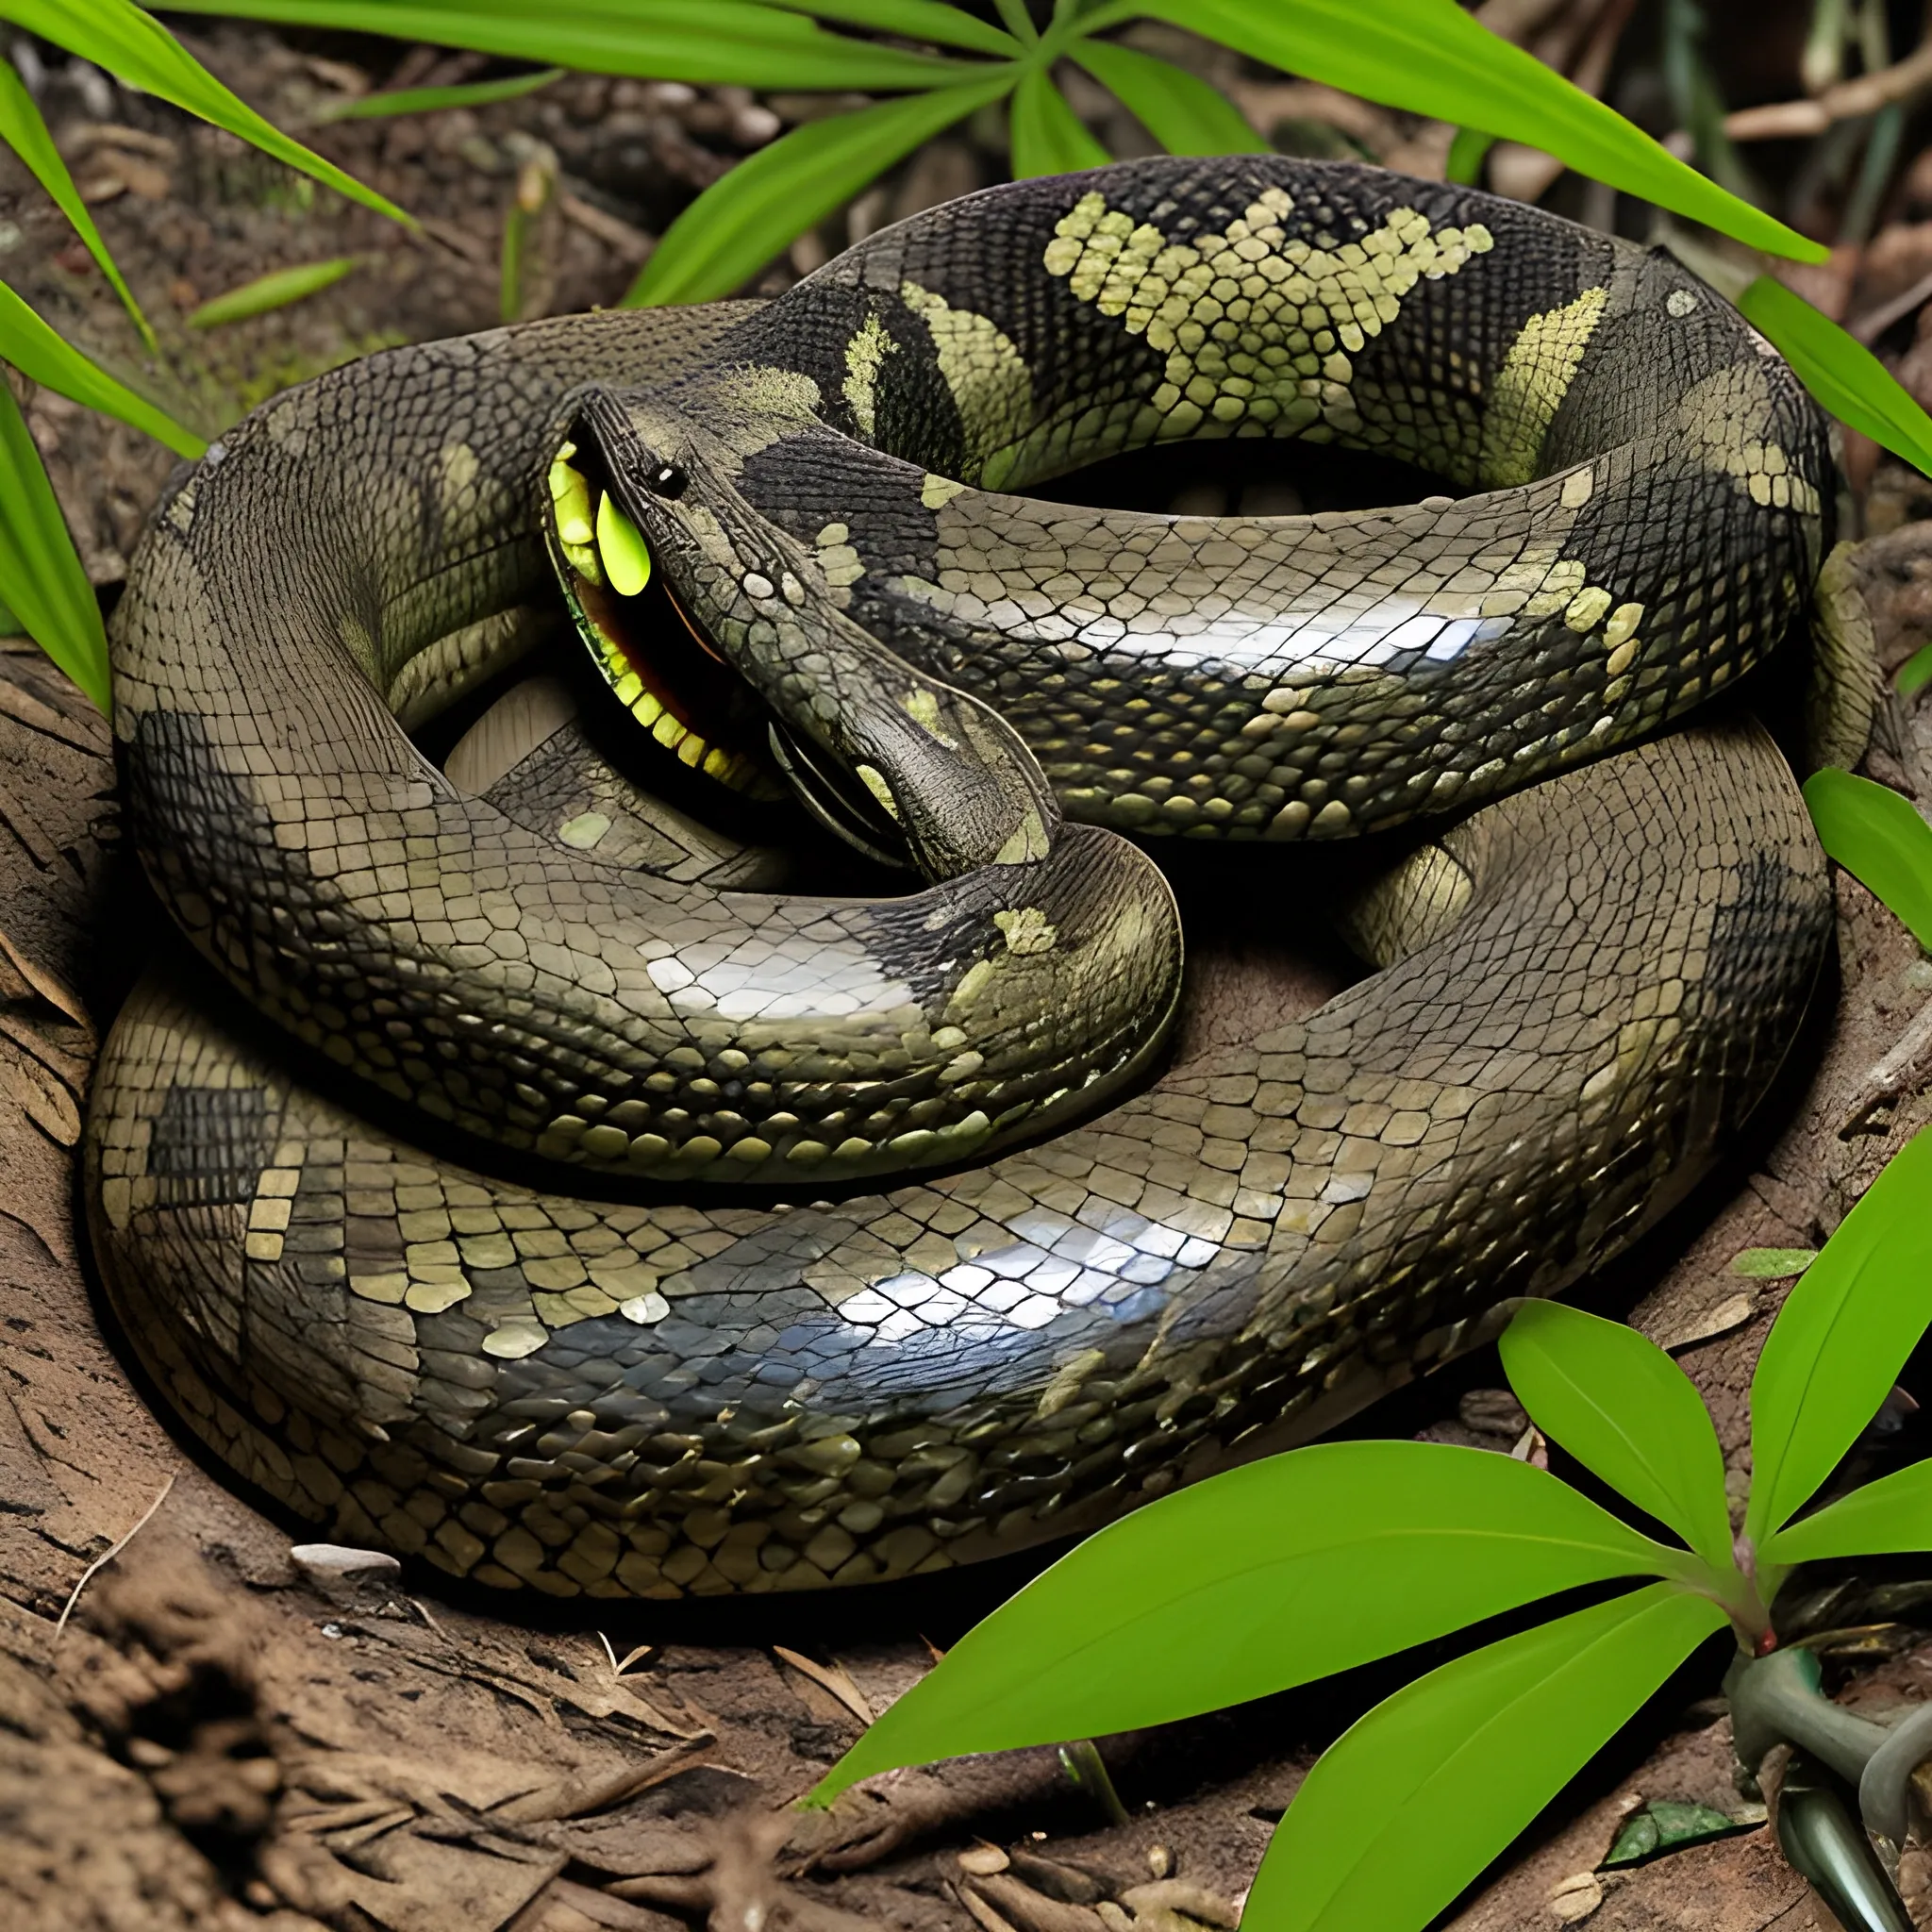 Appearance: The Poisonous Snake is a small to medium-sized repti